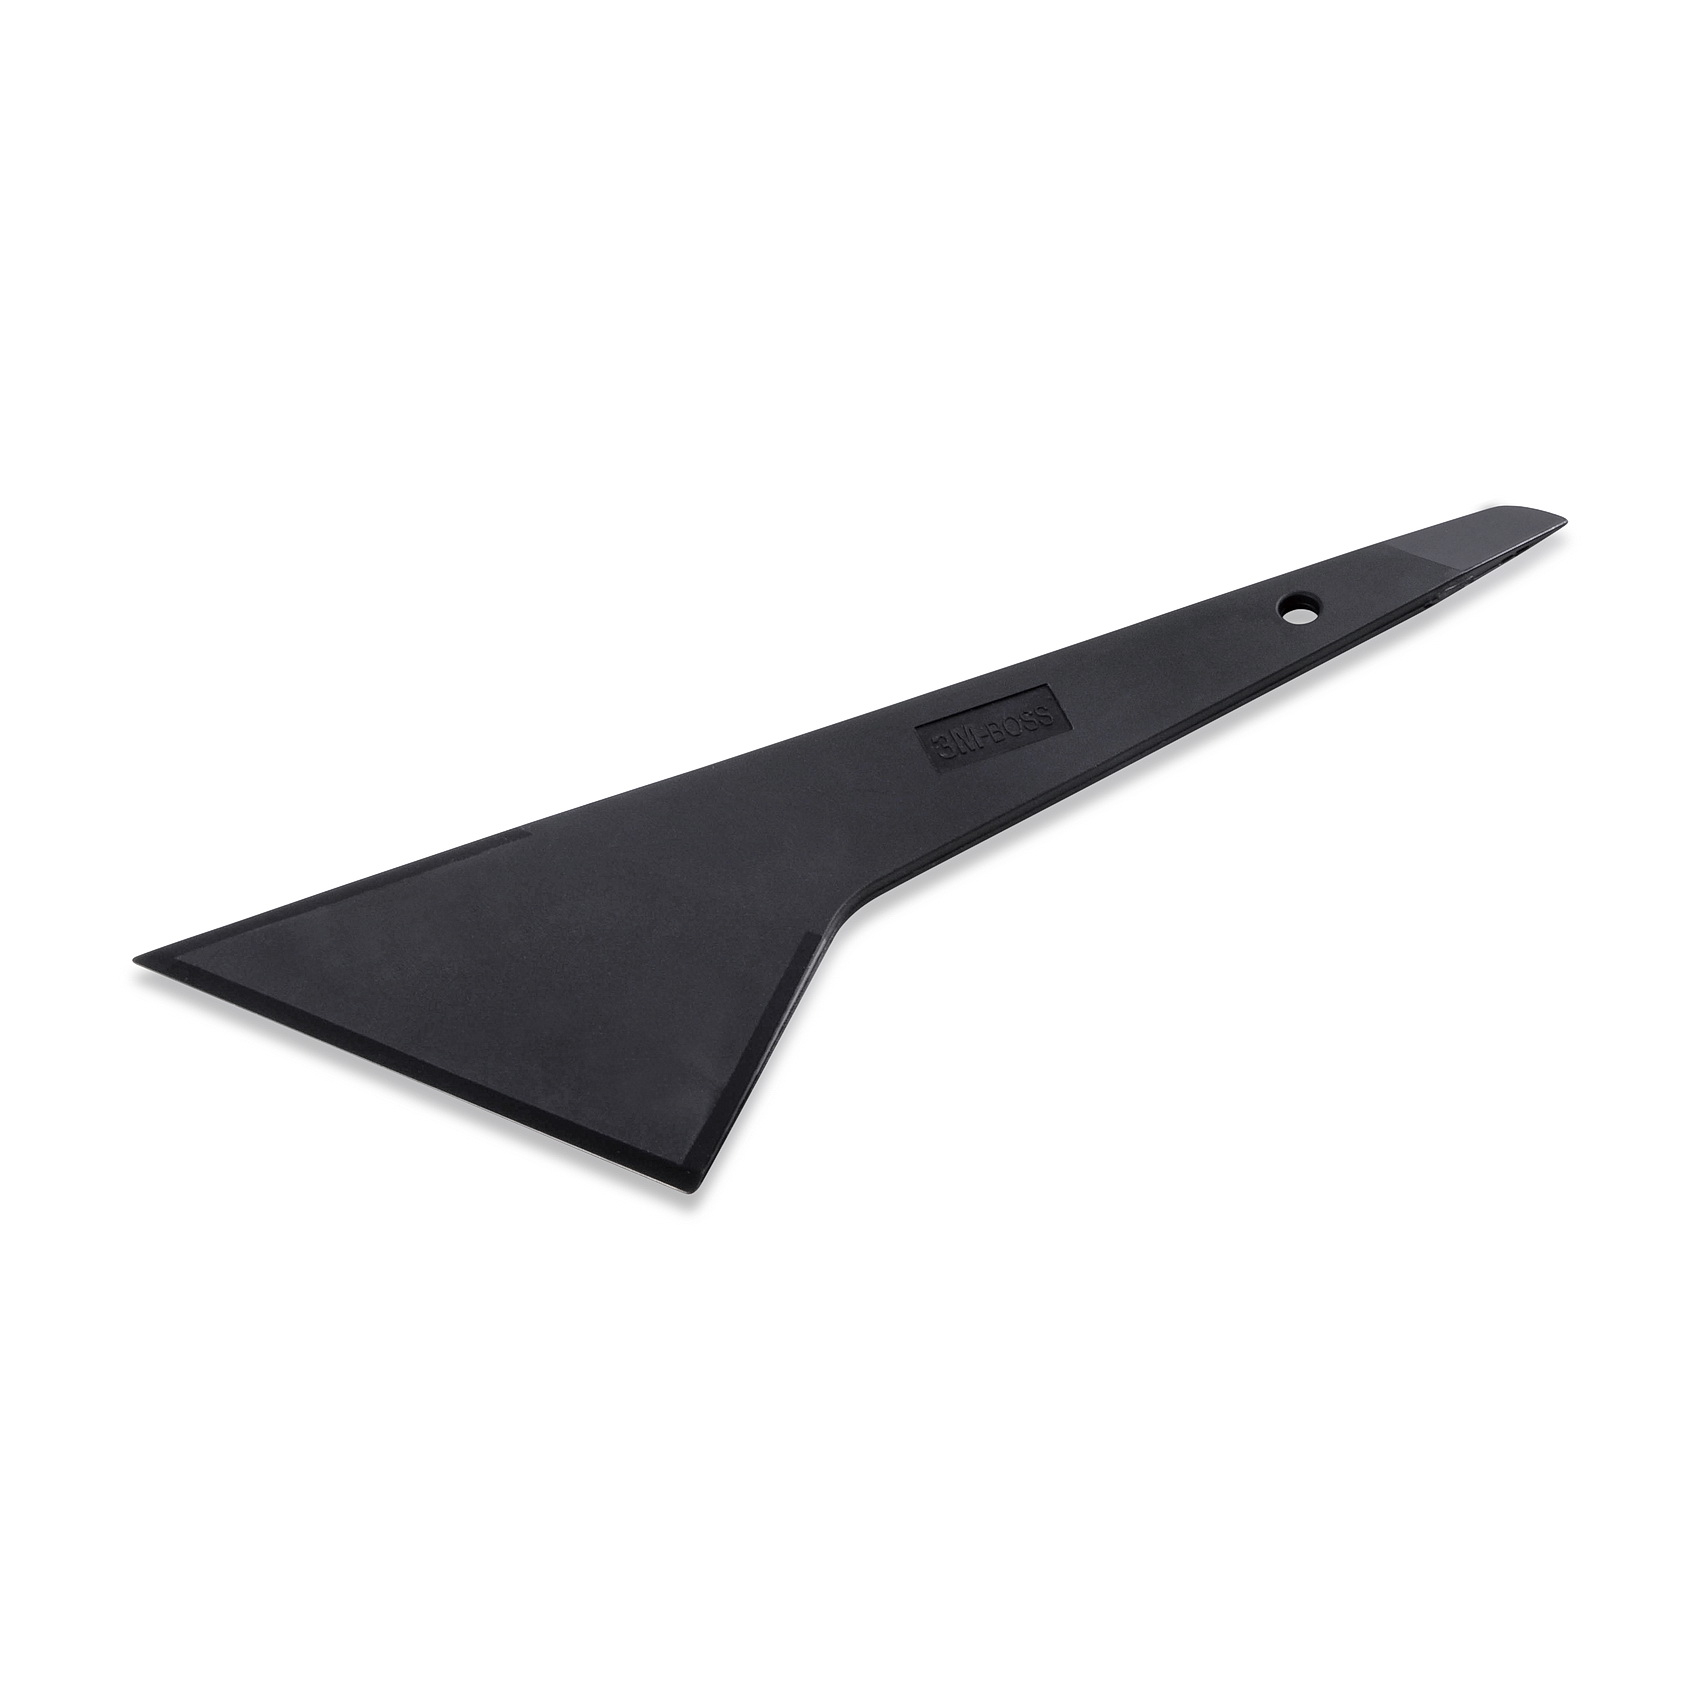 4-1/2'' x 10'' Black High Heat Resistant Squeegee, Resist up to 660 Degrees (350*C)